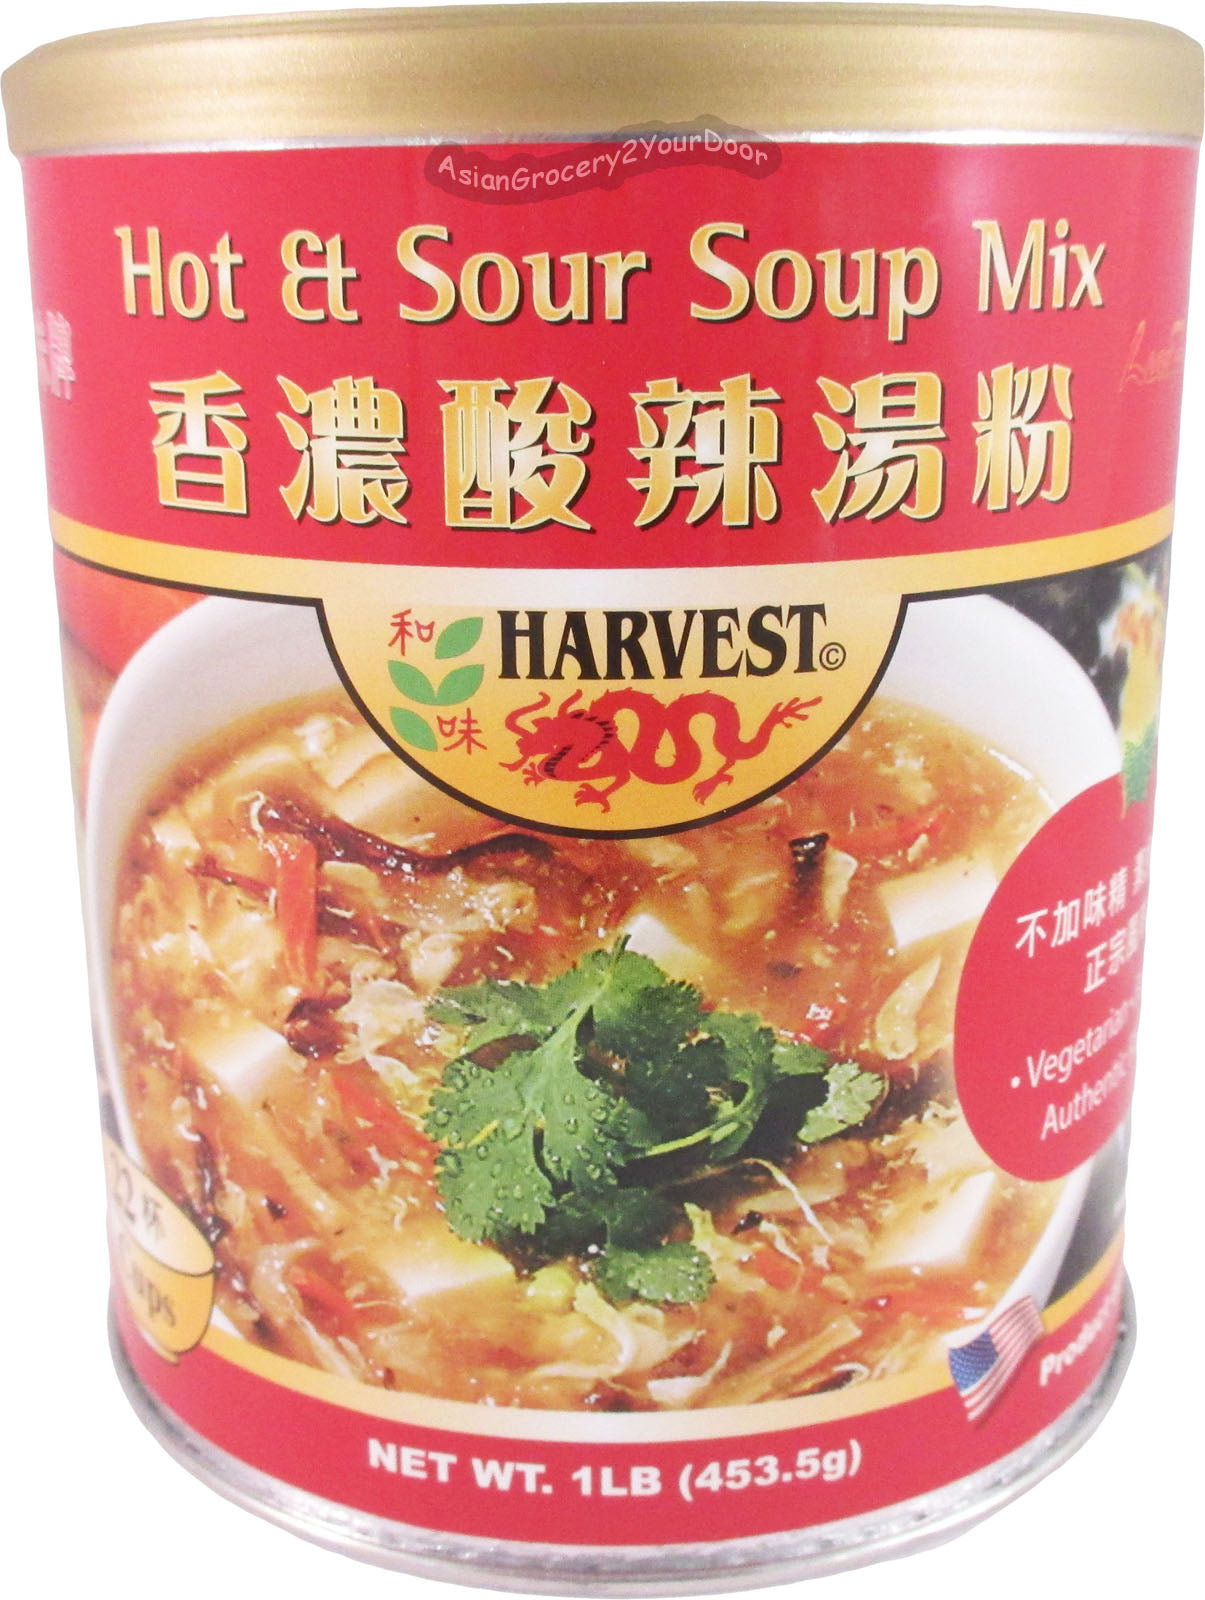 Harvest Hot And Sour Soup Mix Asiangrocery2yourdoor Asiangrocery2yourdoor